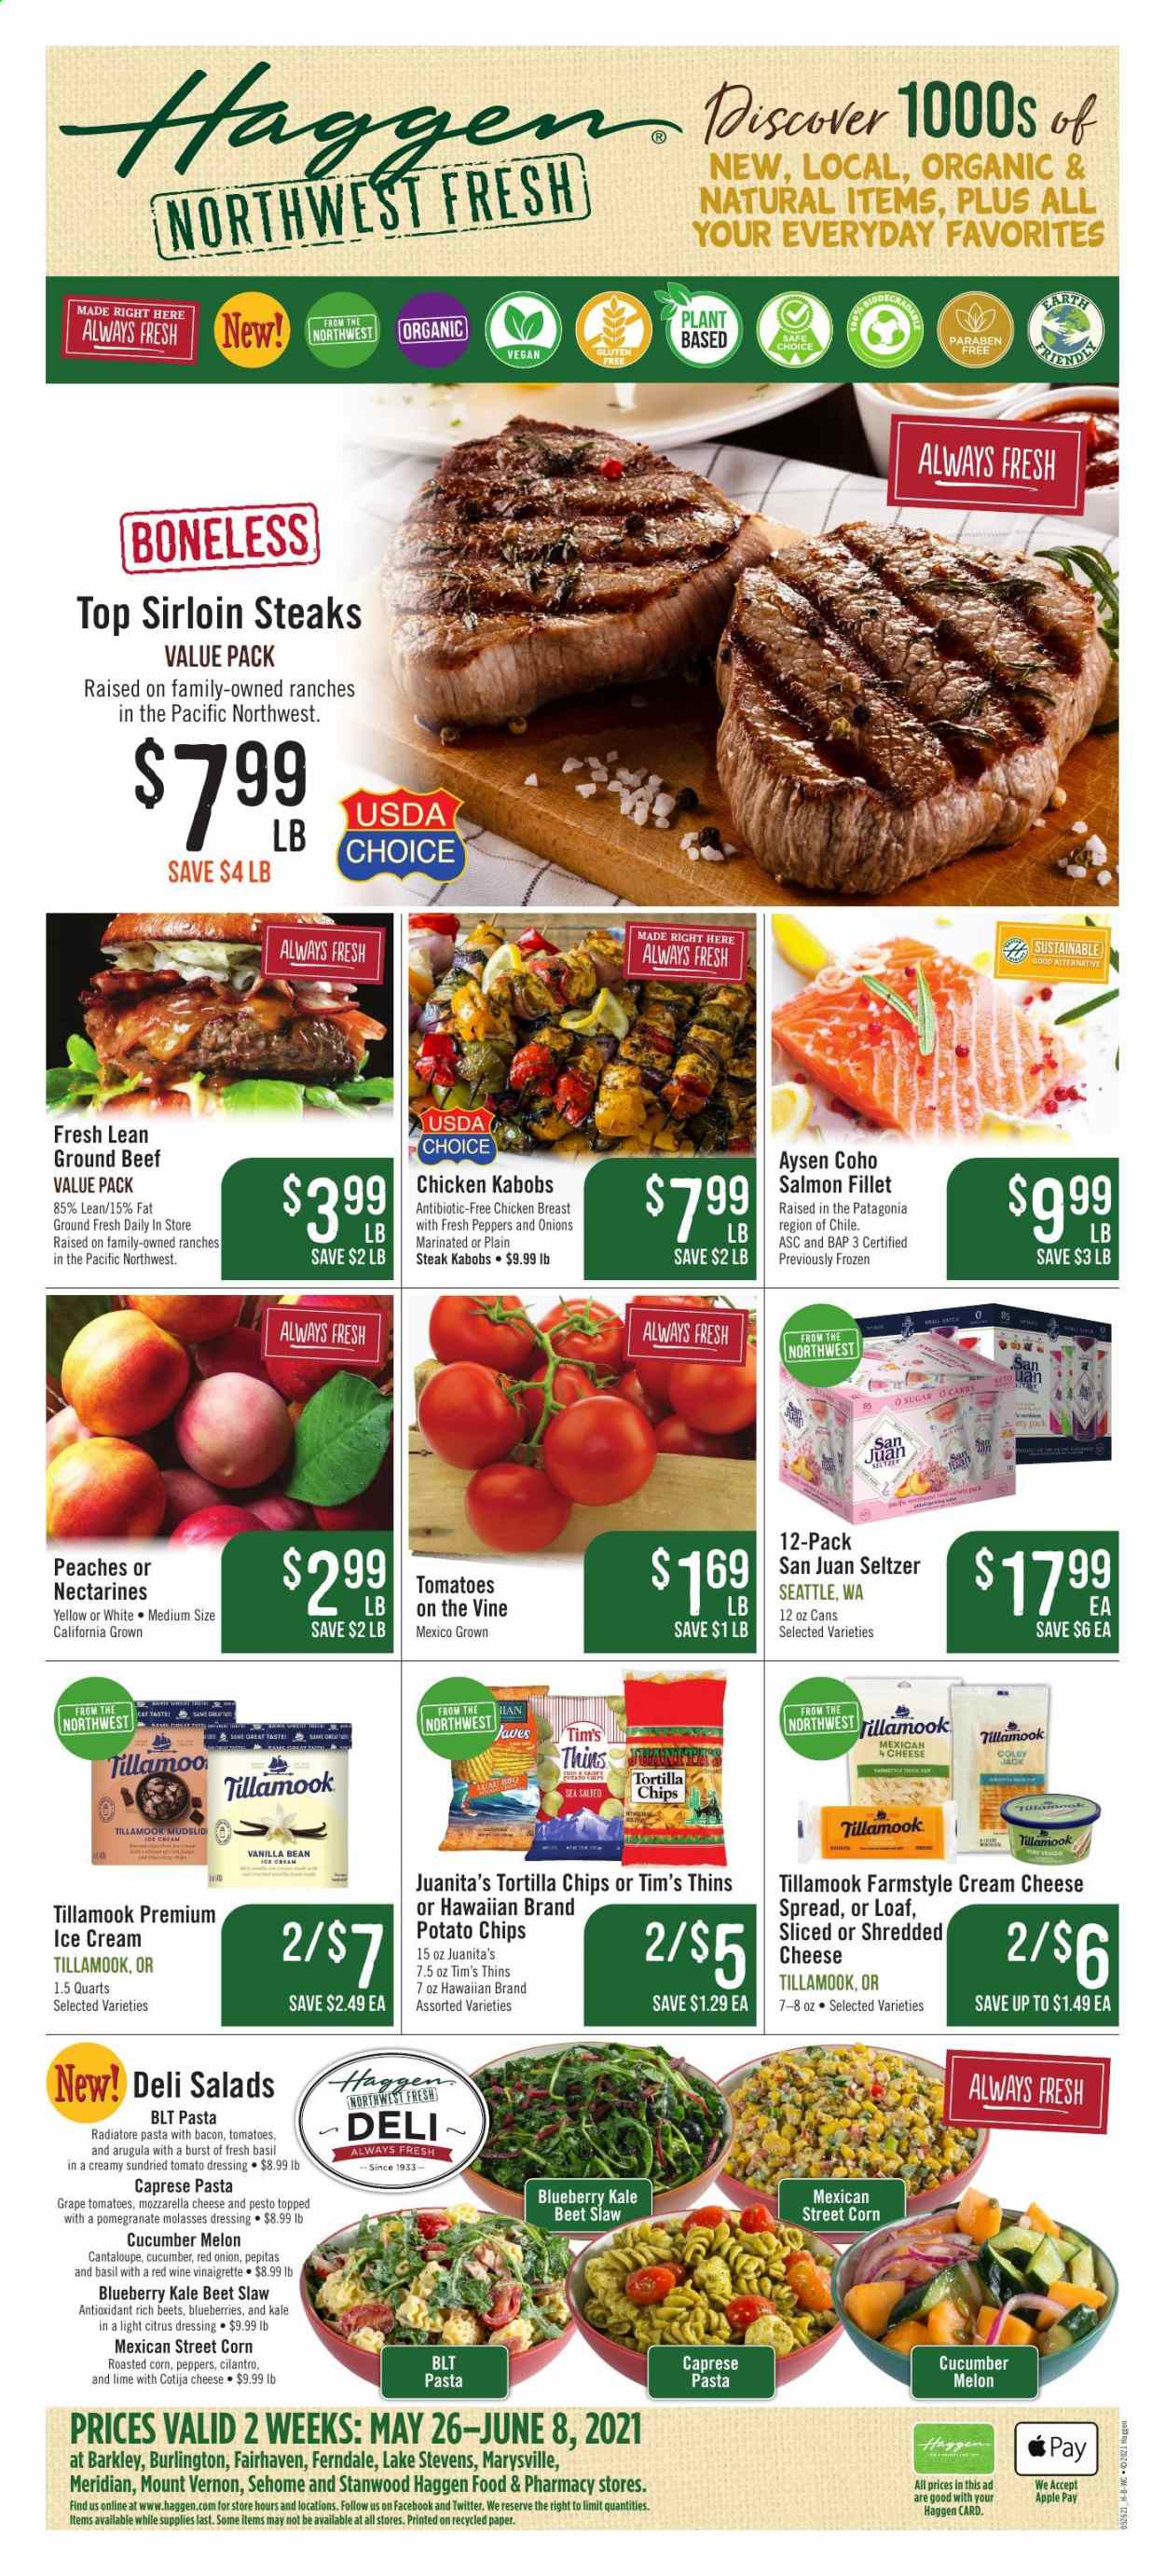 thumbnail - Haggen Flyer - 05/26/2021 - 06/08/2021 - Sales products - arugula, cantaloupe, cucumber, tomatoes, kale, salad, peppers, nectarines, melons, pomegranate, peaches, fish fillets, salmon fillet, pasta, chicken kabobs, kabobs, chicken breasts, cheese spread, mozzarella, shredded cheese, ice cream, tortilla chips, potato chips, Thins, cilantro, basil, molasses, seltzer water, red wine, wine, meat skewer, beef meat, steak, sirloin steak. Page 1.